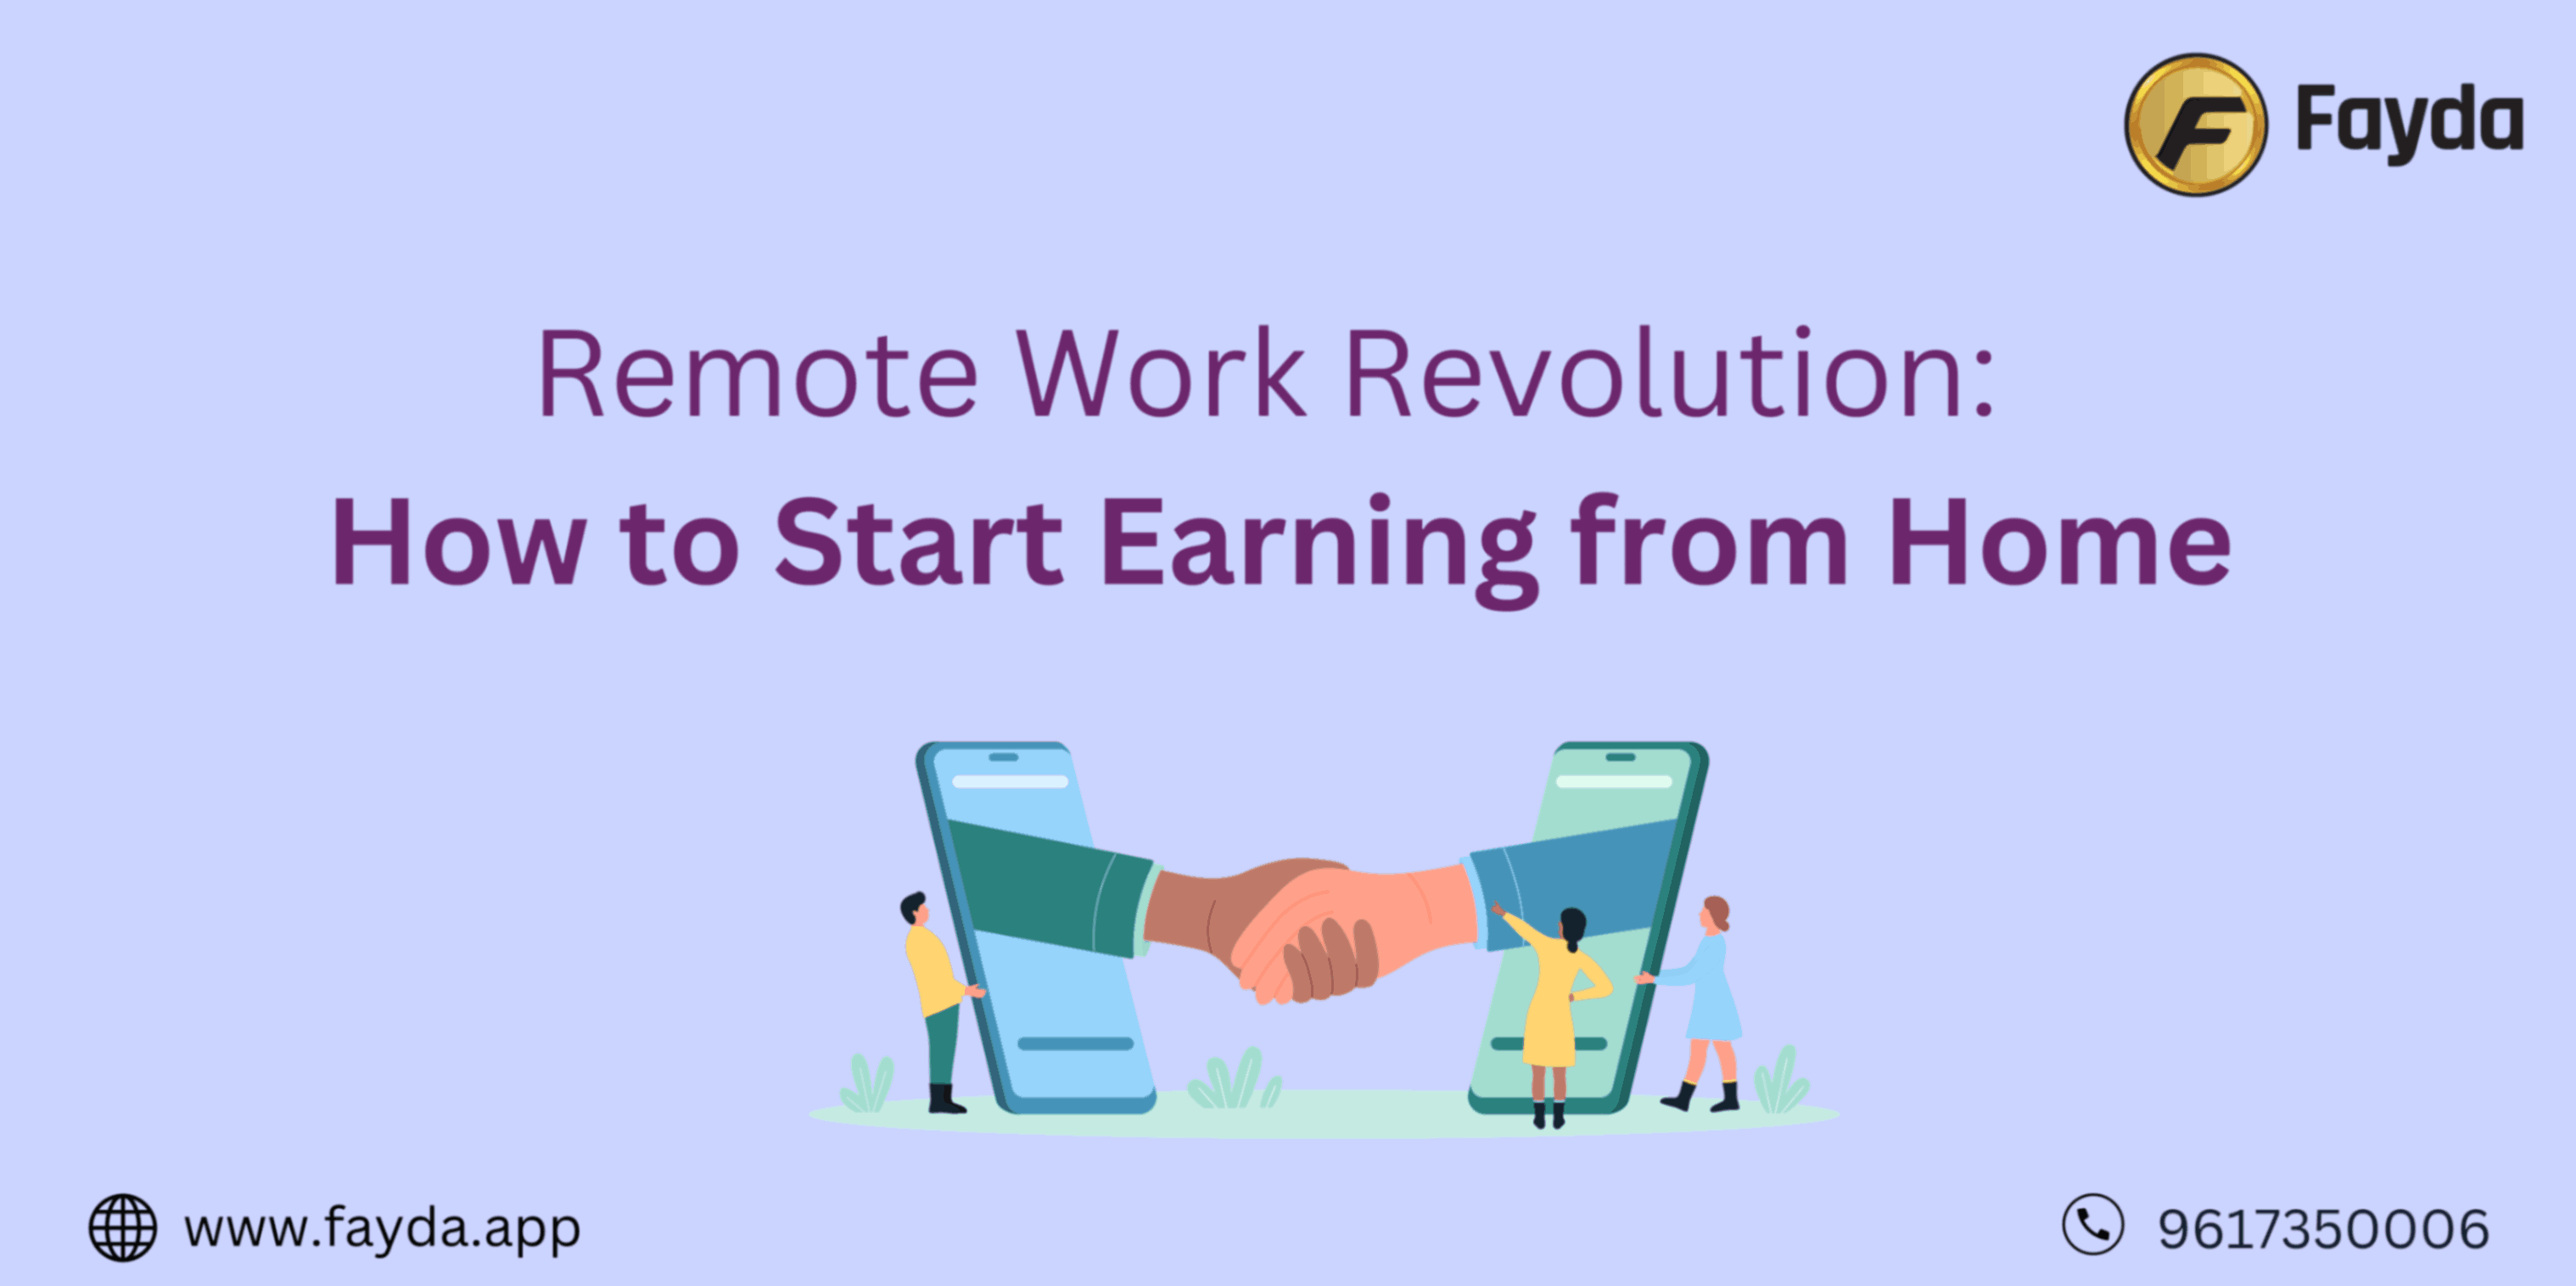 Remote Work Revolution: How to Start Earning from Home